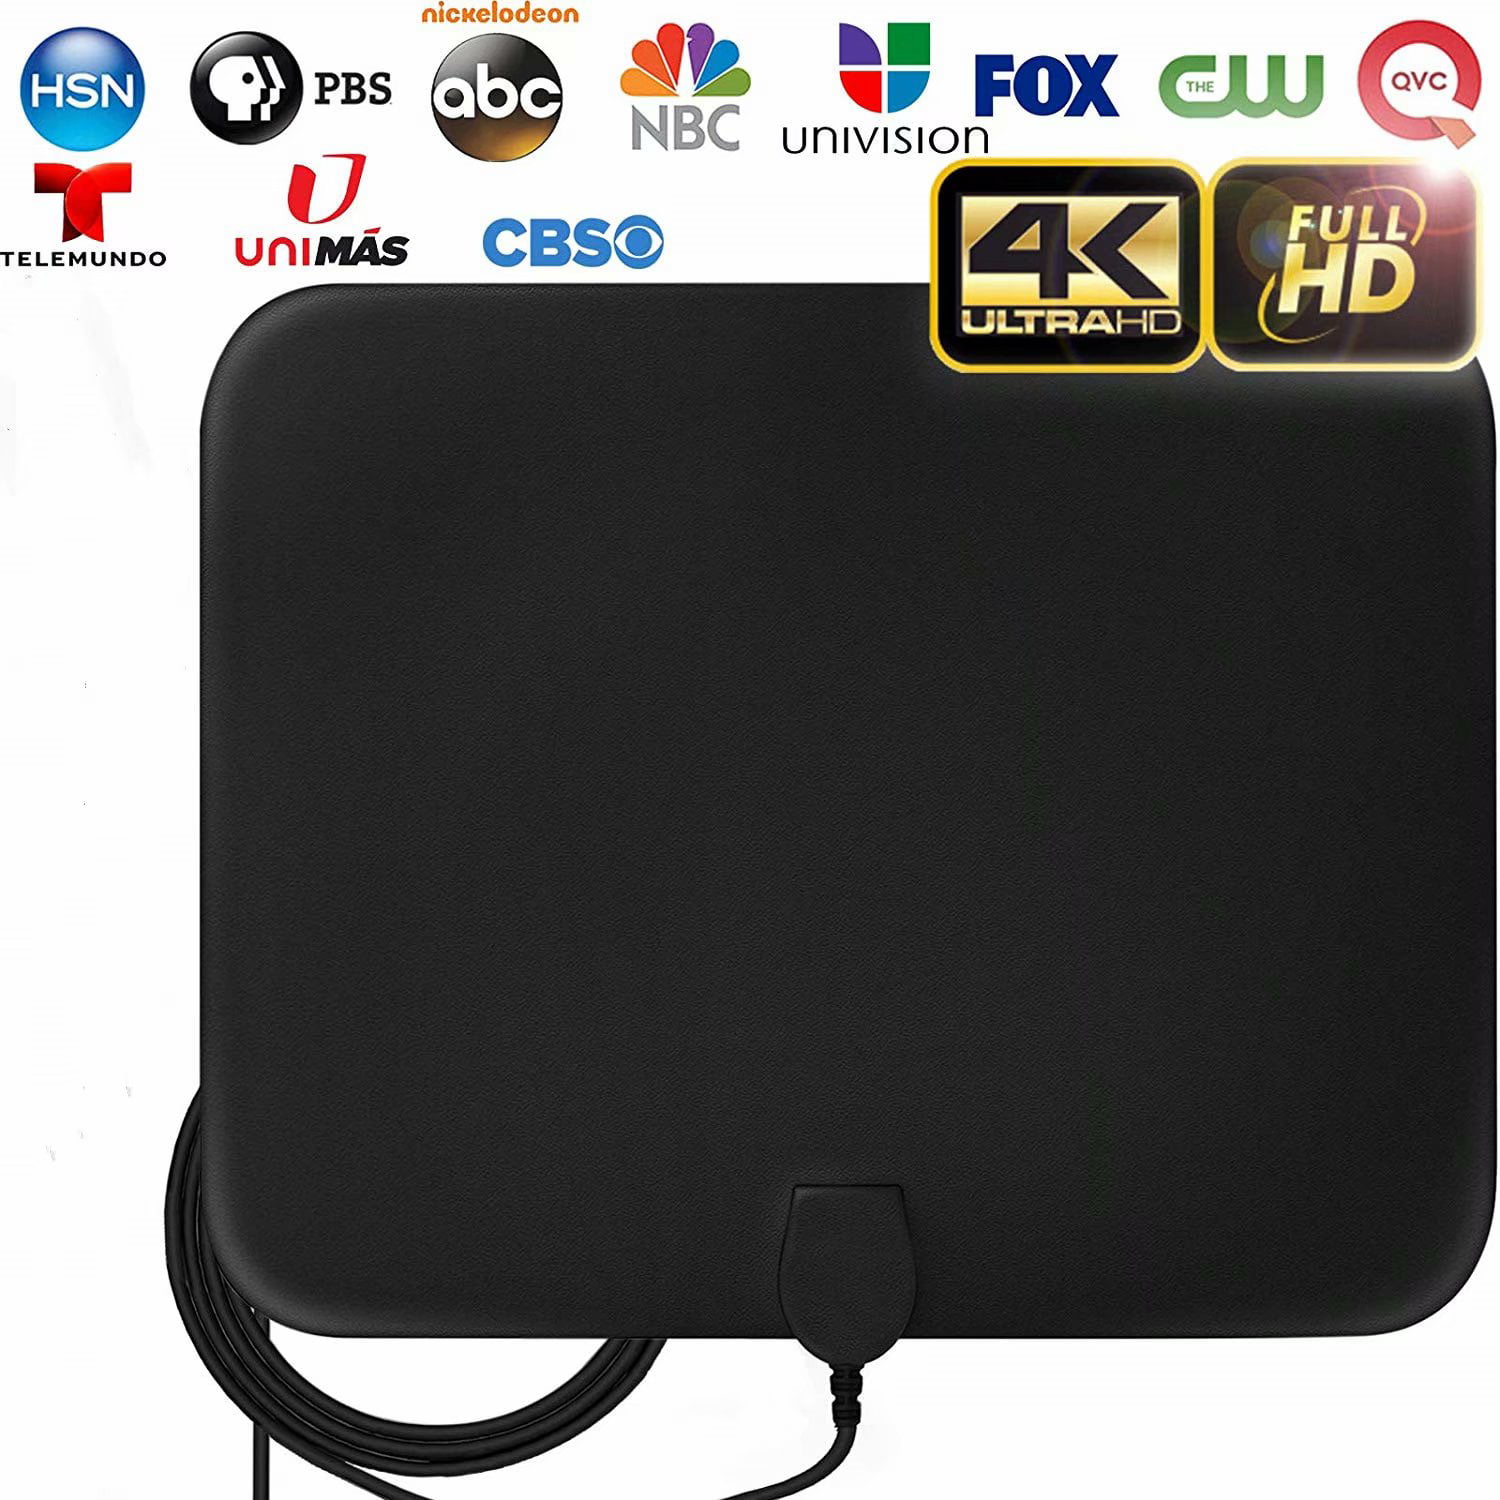 TV Antenna,[2020 Updated] Amplified HD Digital Indoor TV Antenna, TV Aerial  120-150 Miles Range, 4K 1080P HD VHF UHF for Local Channels, 18FT Premium  Coaxial Cable - Walmart.com - Walmart.com